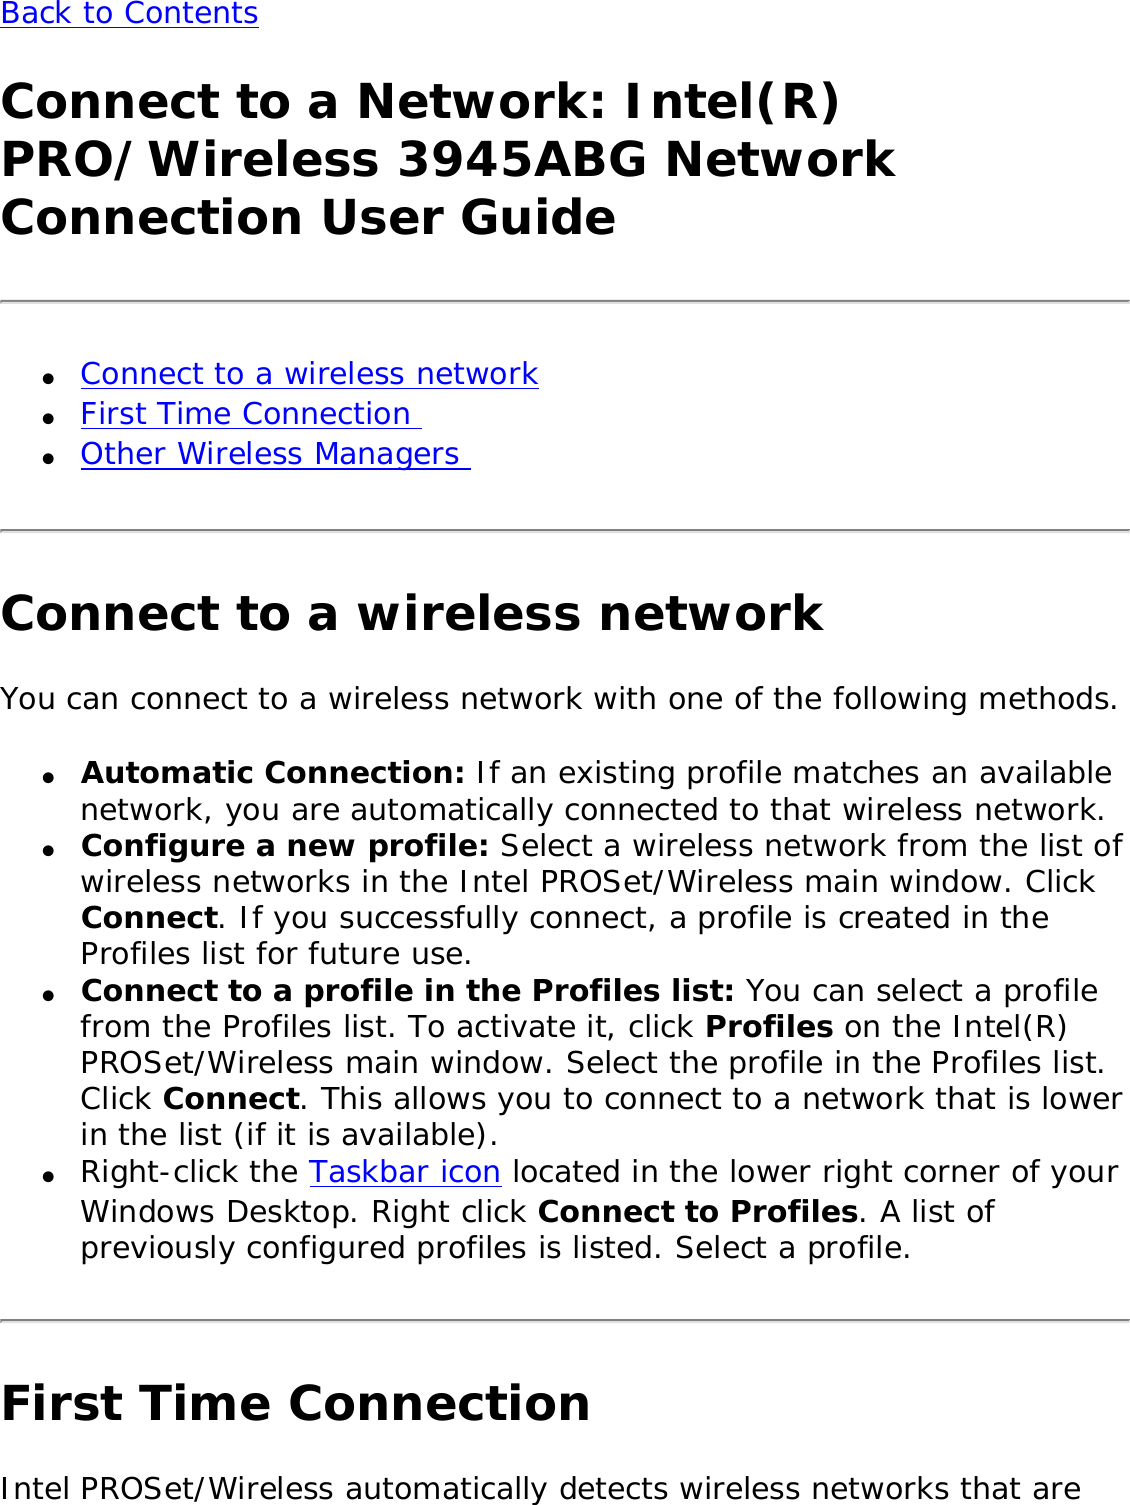 Back to Contents Connect to a Network: Intel(R) PRO/Wireless 3945ABG Network Connection User Guide●     Connect to a wireless network ●     First Time Connection ●     Other Wireless Managers Connect to a wireless networkYou can connect to a wireless network with one of the following methods. ●     Automatic Connection: If an existing profile matches an available network, you are automatically connected to that wireless network. ●     Configure a new profile: Select a wireless network from the list of wireless networks in the Intel PROSet/Wireless main window. Click Connect. If you successfully connect, a profile is created in the Profiles list for future use.●     Connect to a profile in the Profiles list: You can select a profile from the Profiles list. To activate it, click Profiles on the Intel(R) PROSet/Wireless main window. Select the profile in the Profiles list. Click Connect. This allows you to connect to a network that is lower in the list (if it is available). ●     Right-click the Taskbar icon located in the lower right corner of your Windows Desktop. Right click Connect to Profiles. A list of previously configured profiles is listed. Select a profile.First Time ConnectionIntel PROSet/Wireless automatically detects wireless networks that are 